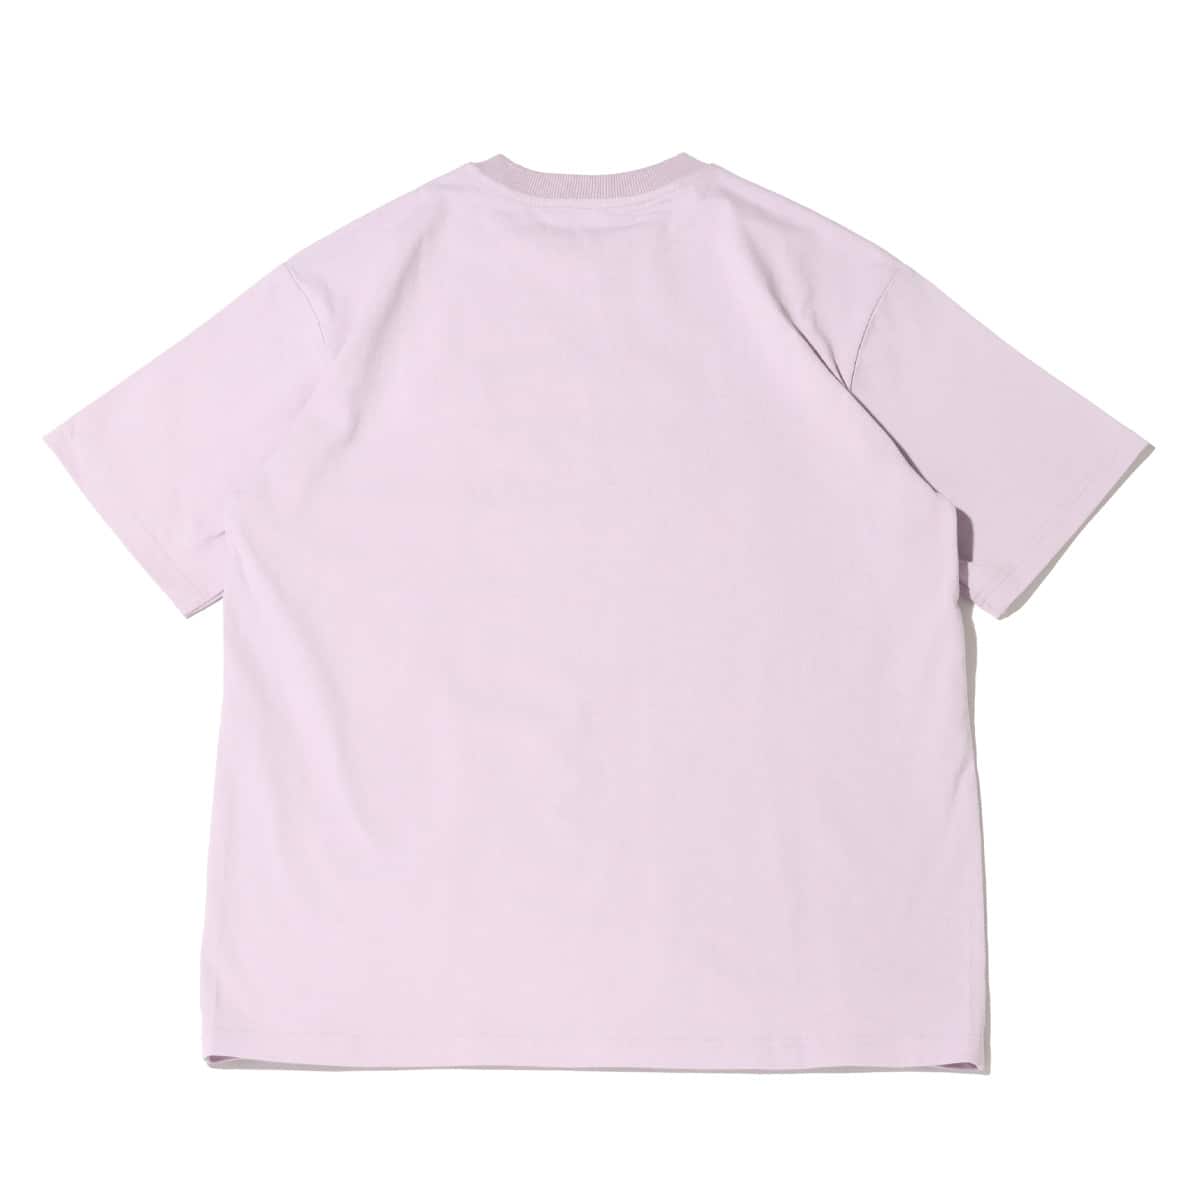 atmos pink × LIL LEAGUE 書き下ろしロゴ Tシャツ PINK